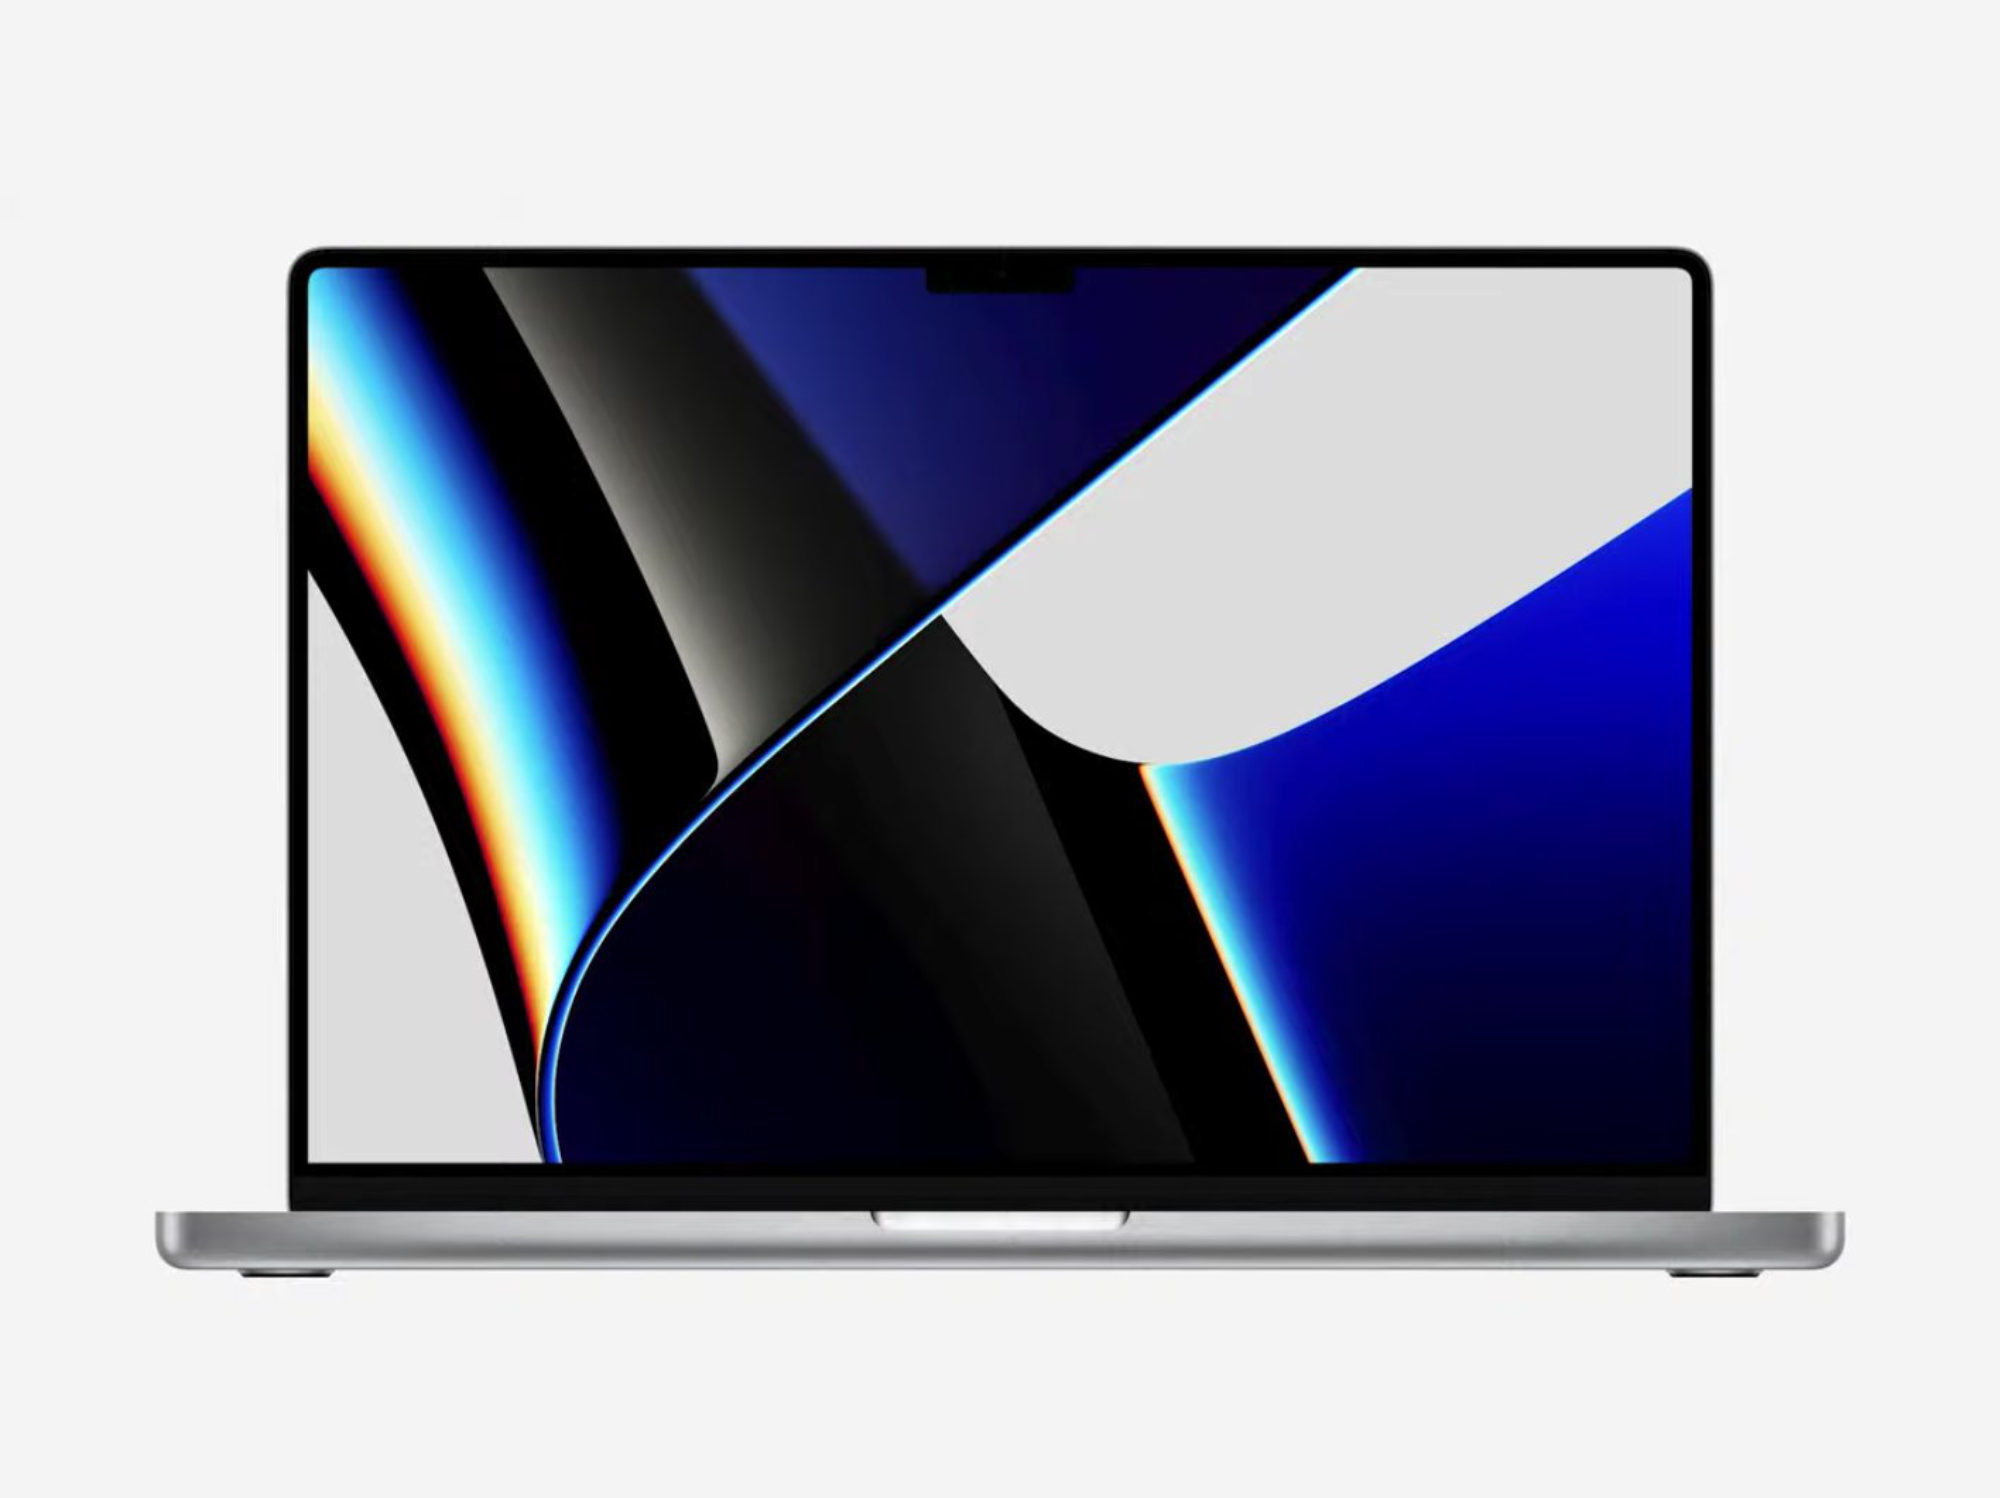 Get the new 2021 Apple MacBook Pro Wallpapers right here